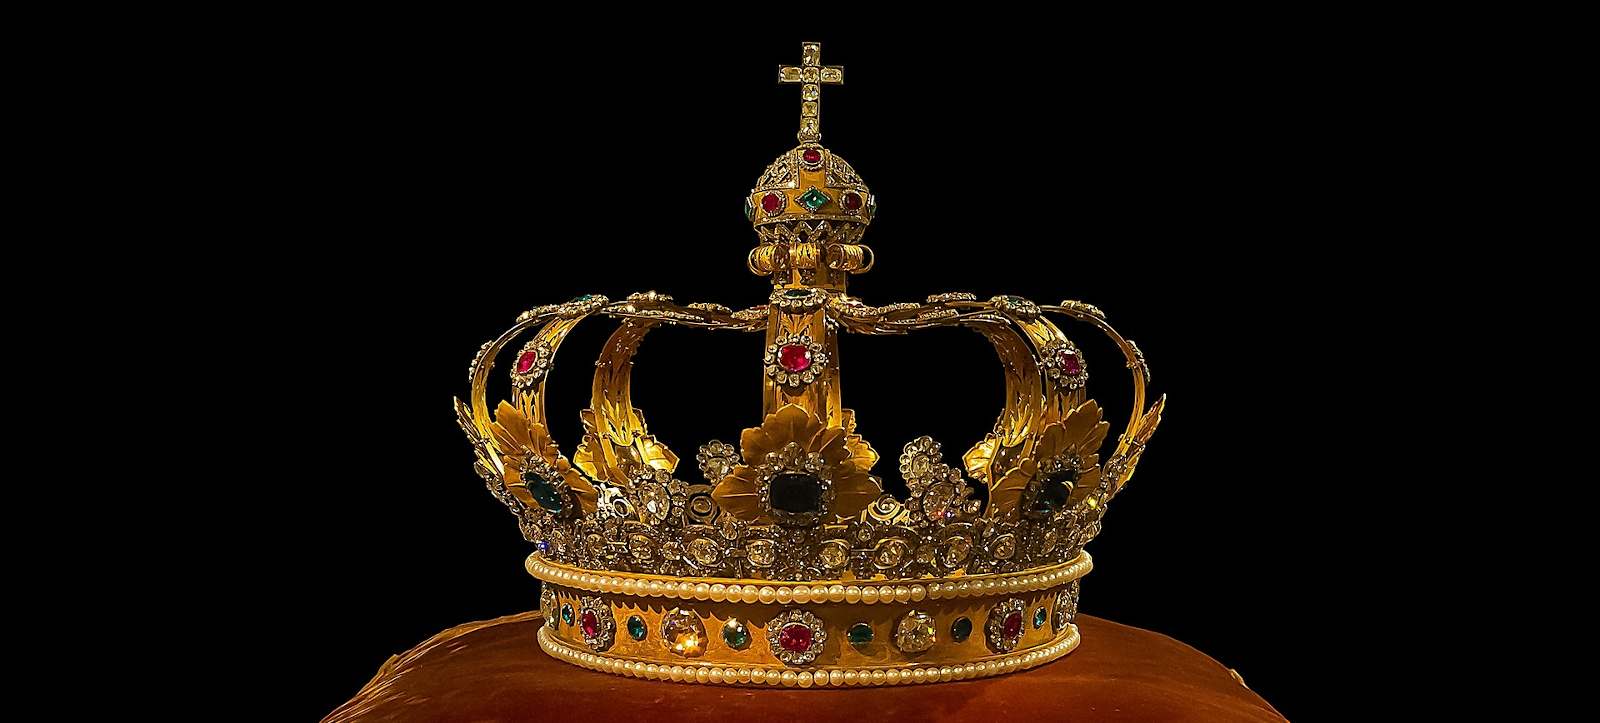 golden bejeweled royal crown on an embroidered red pillow